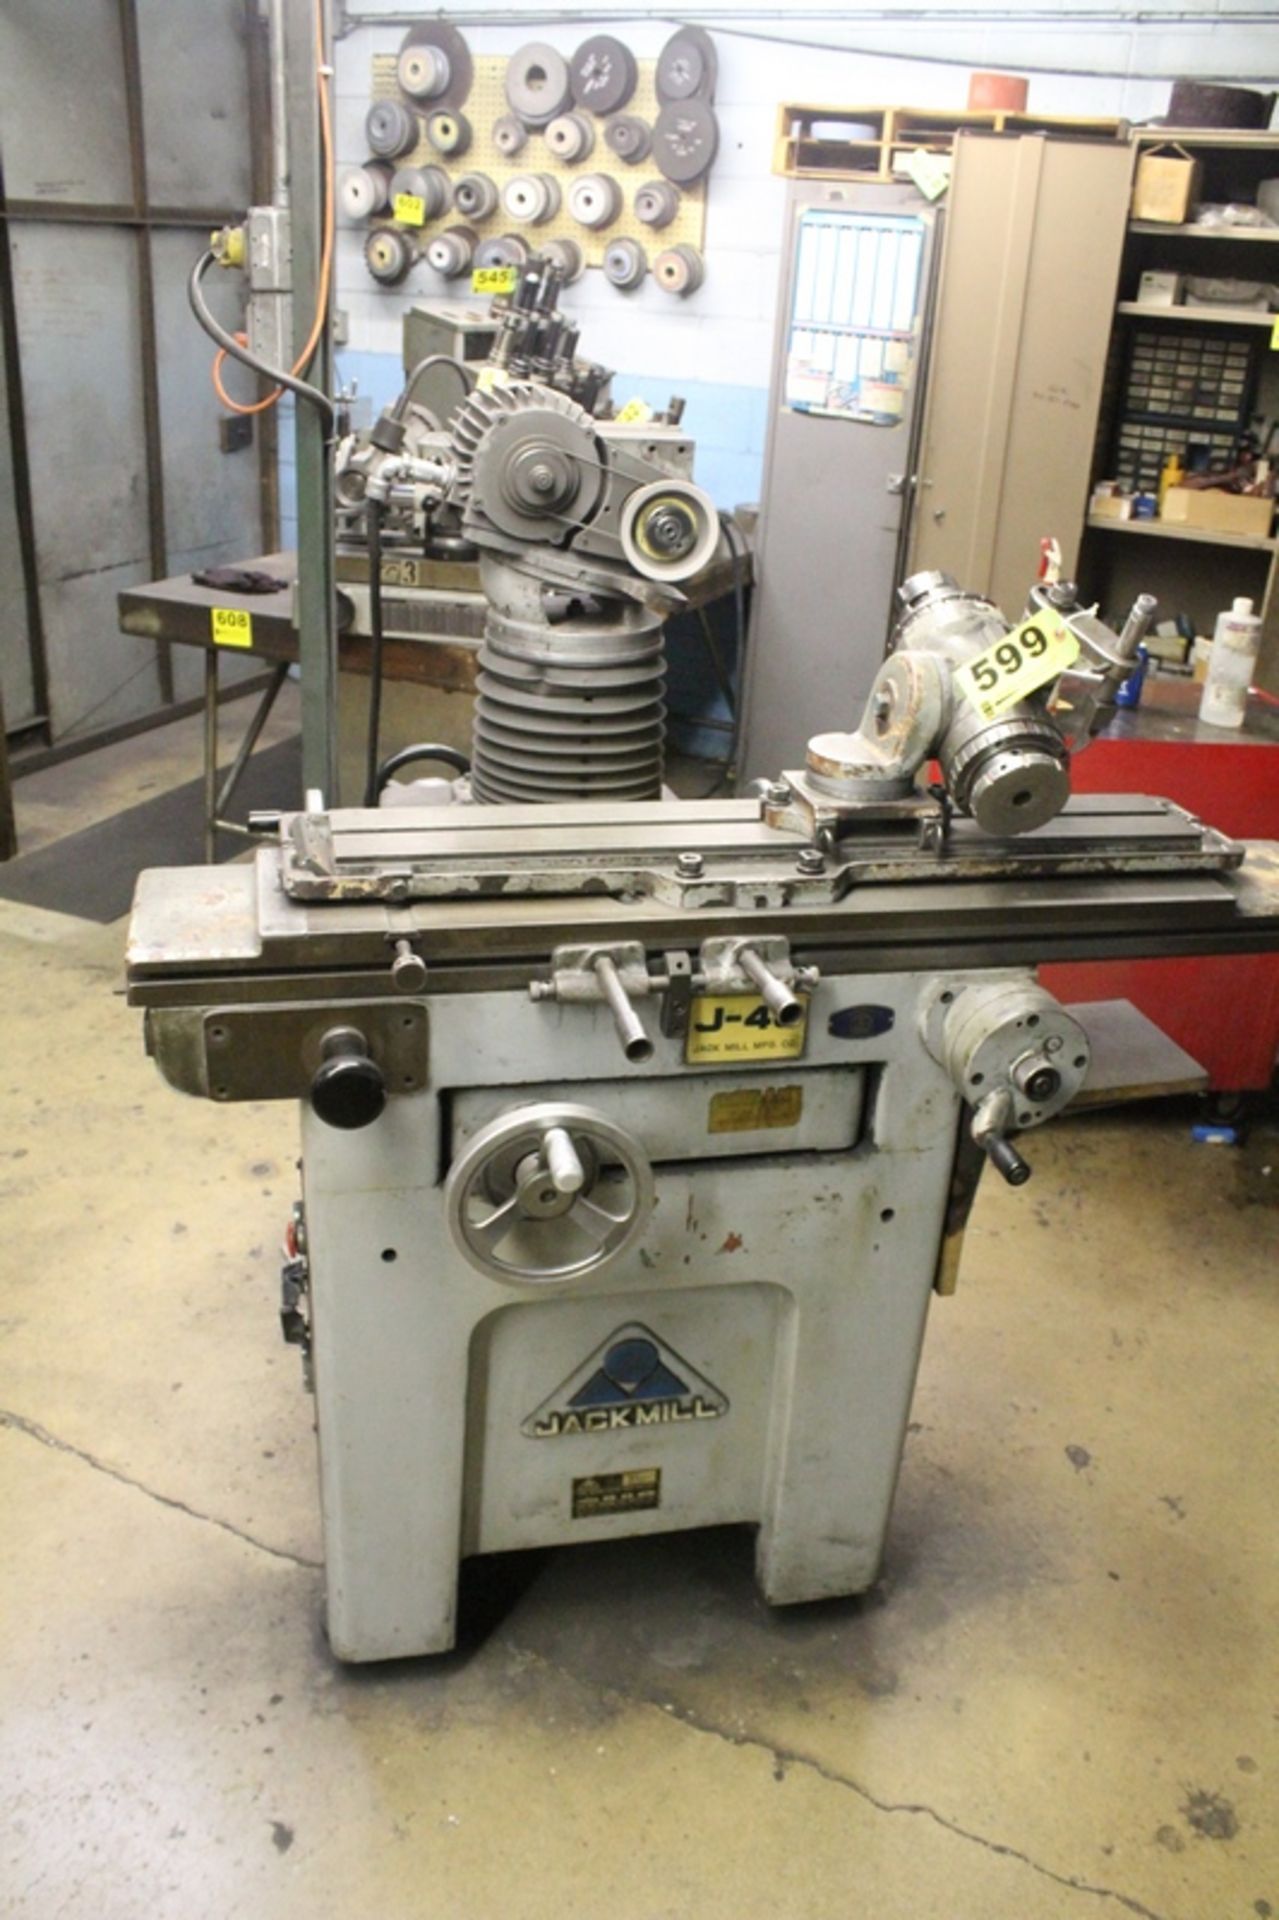 JACK MILL MODEL J-40 UNIVERSAL TOOL & CUTTER GRINDER, S/N 1-10920 (NEW 1986), WITH ACCESSORIES